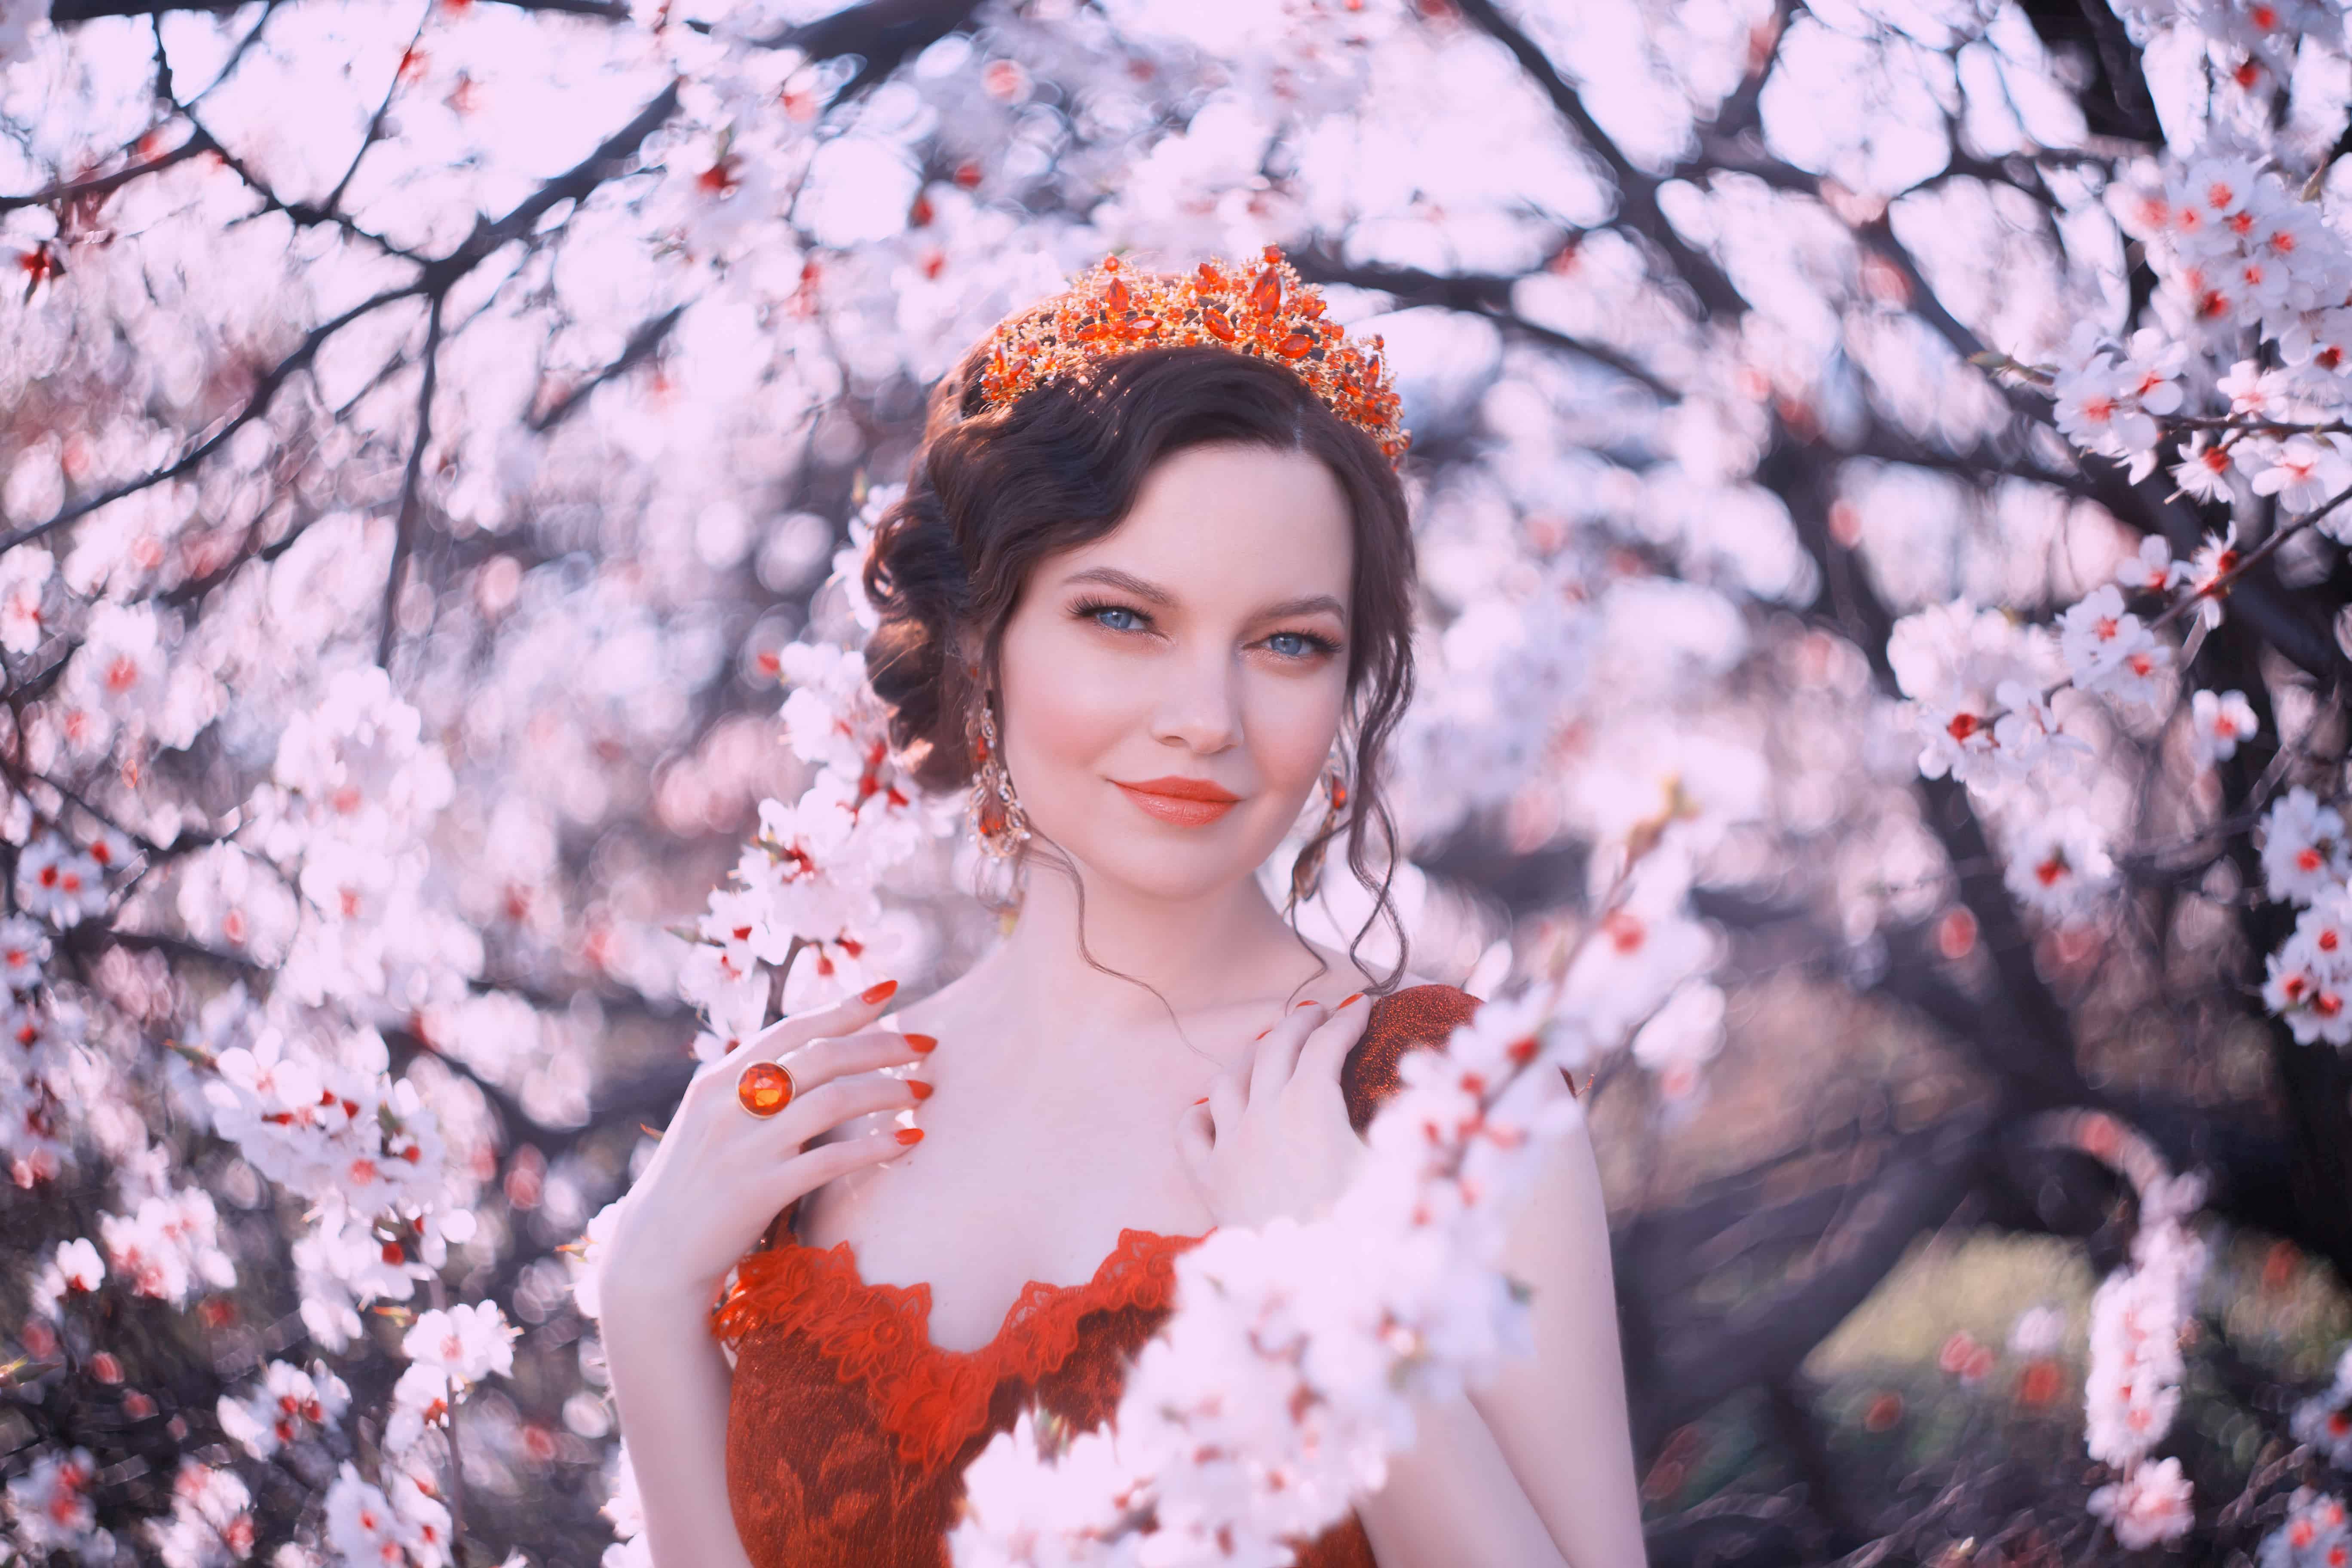 Queen of Spring walks in the blooming garden, a portrait photo of a pretty woman with dark hair and a golden crown on her head, the royal greatness, a red lady with bright blue eyes in sakura flowers